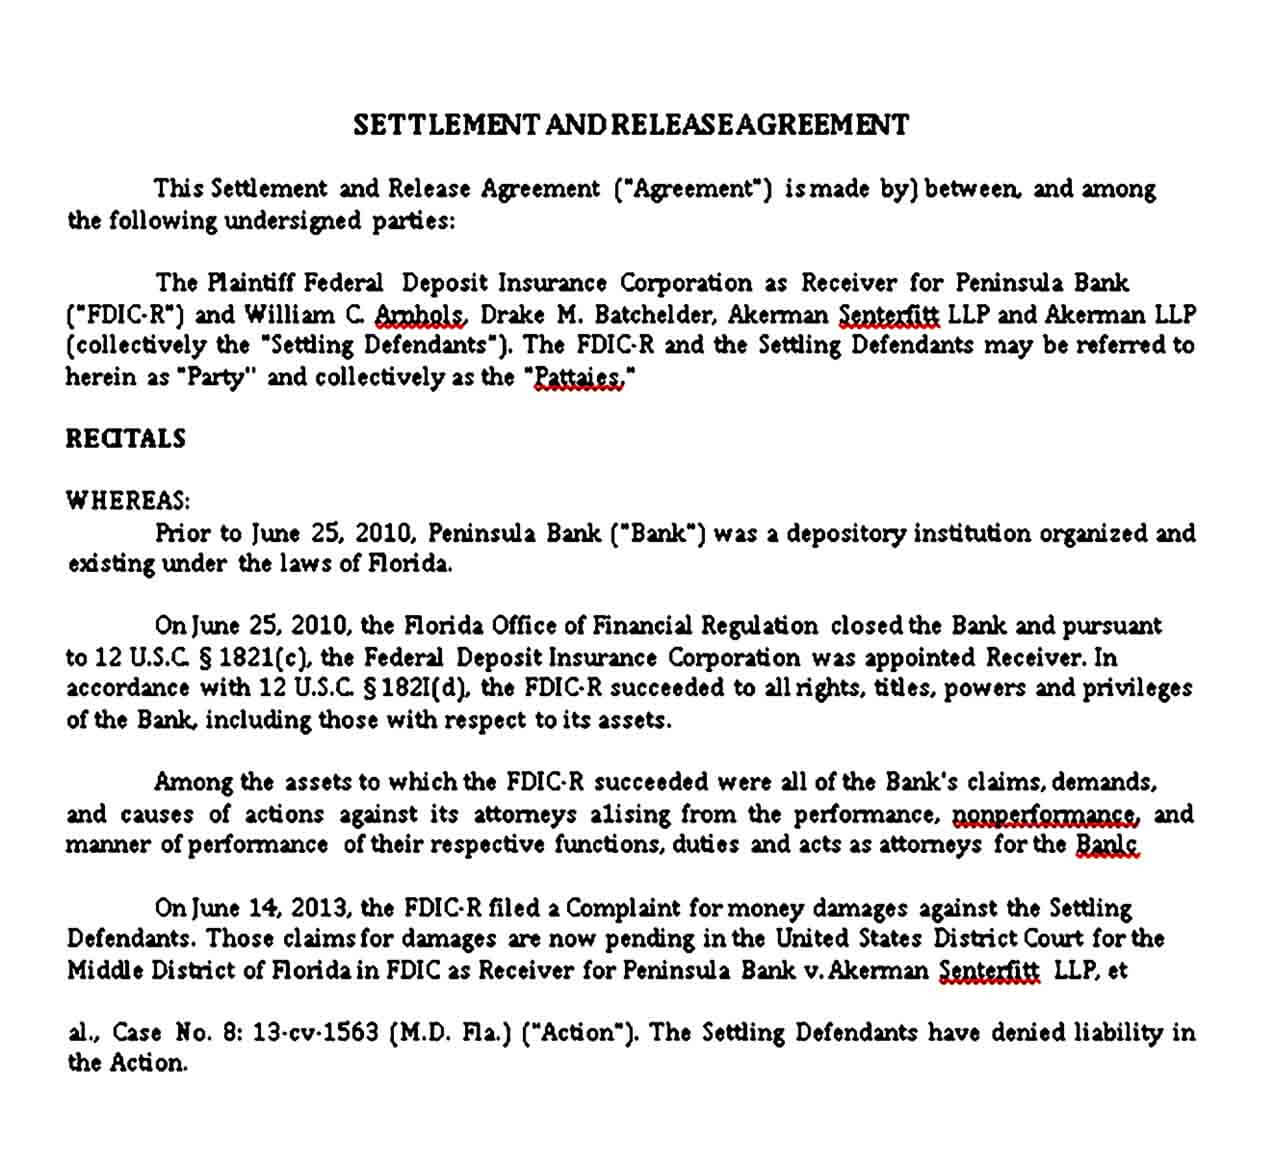 Settlement and Release Agreement Template